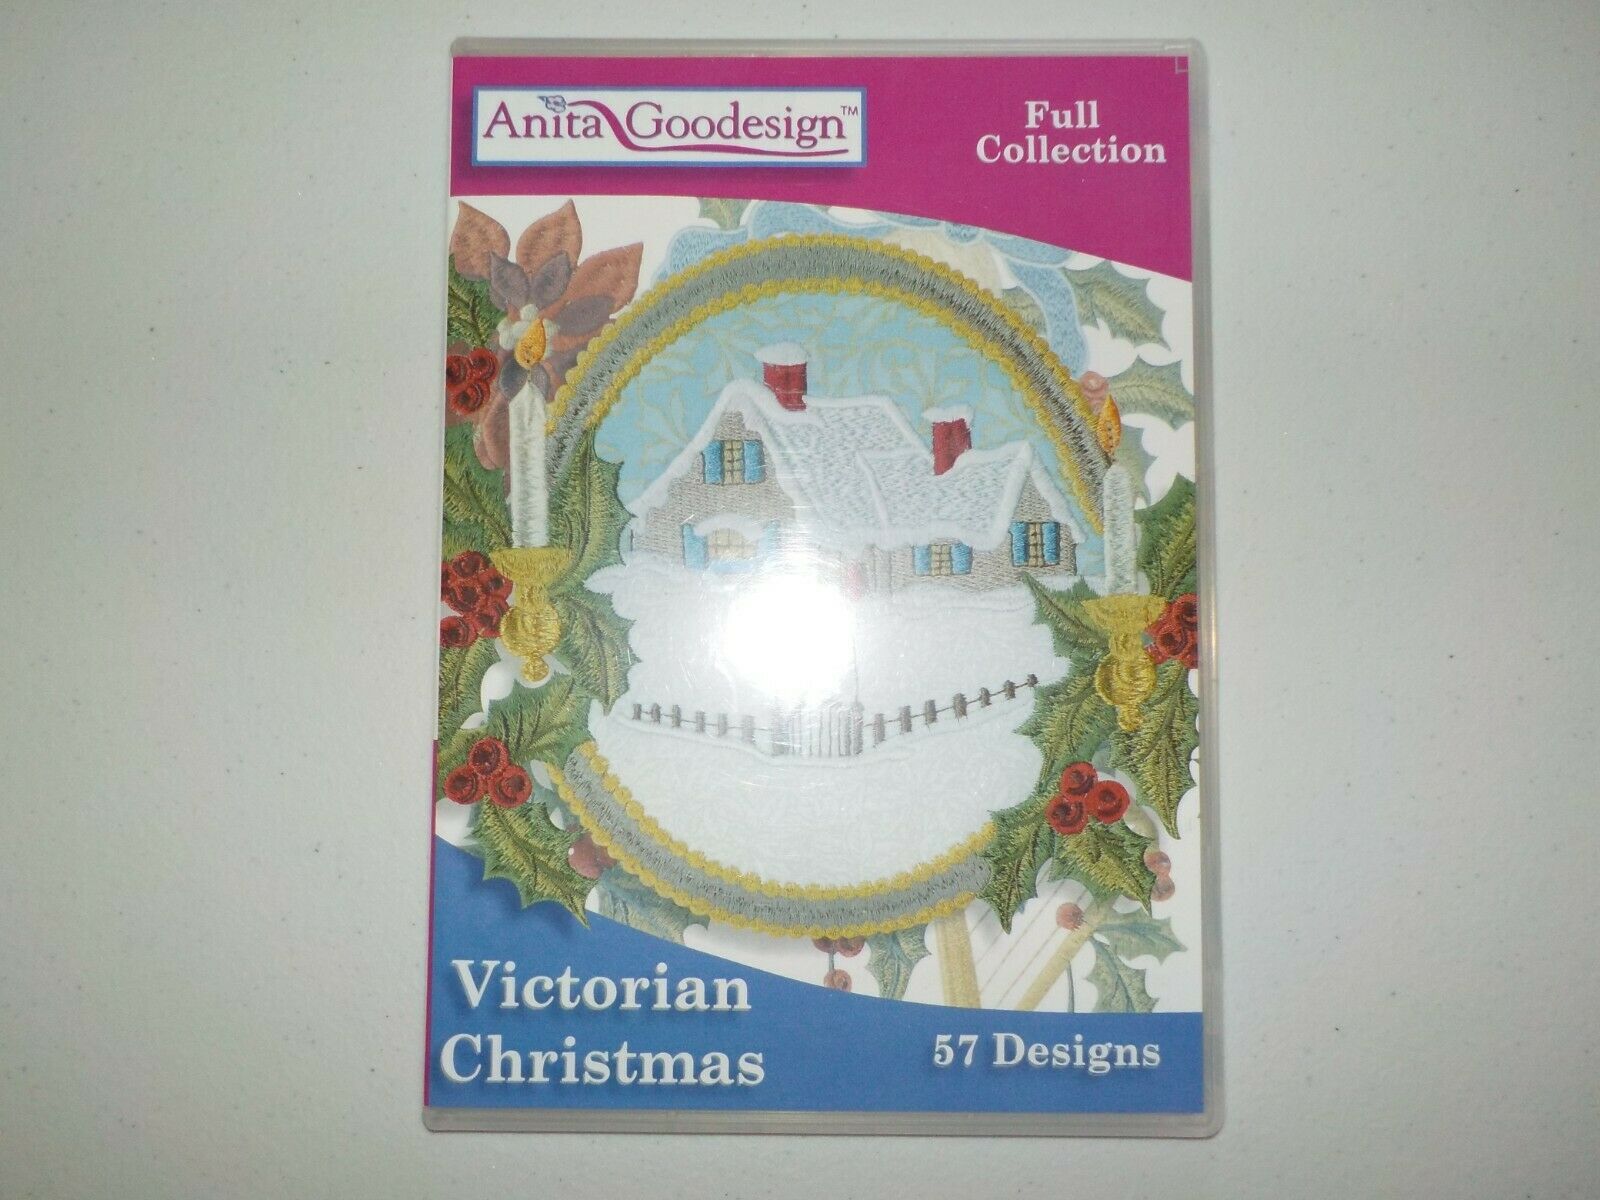 Anita Goodesign: Full Collection, Victorian Christmas Embroidery Cd, 228aghd,new